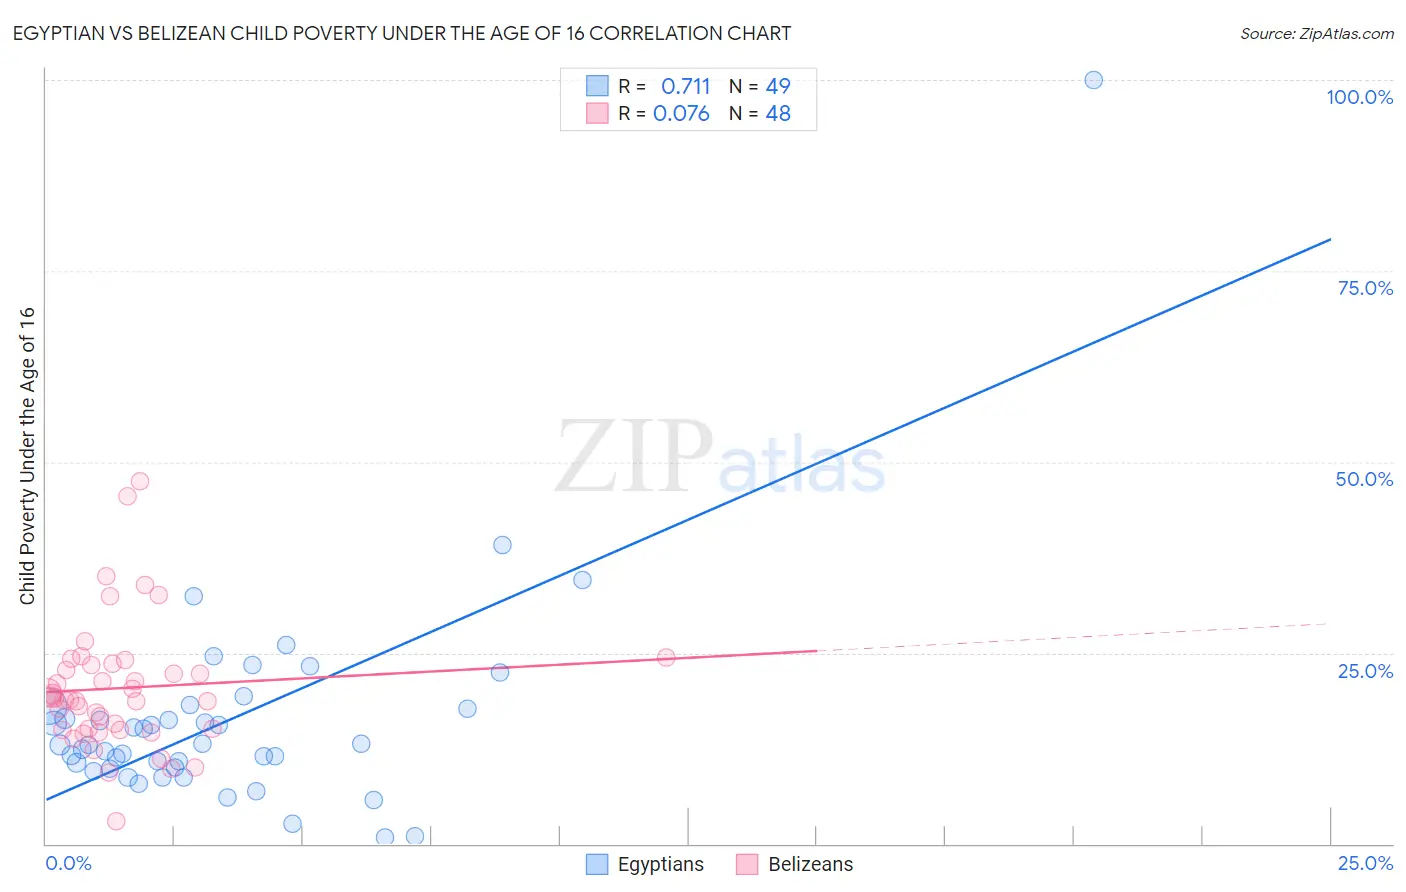 Egyptian vs Belizean Child Poverty Under the Age of 16